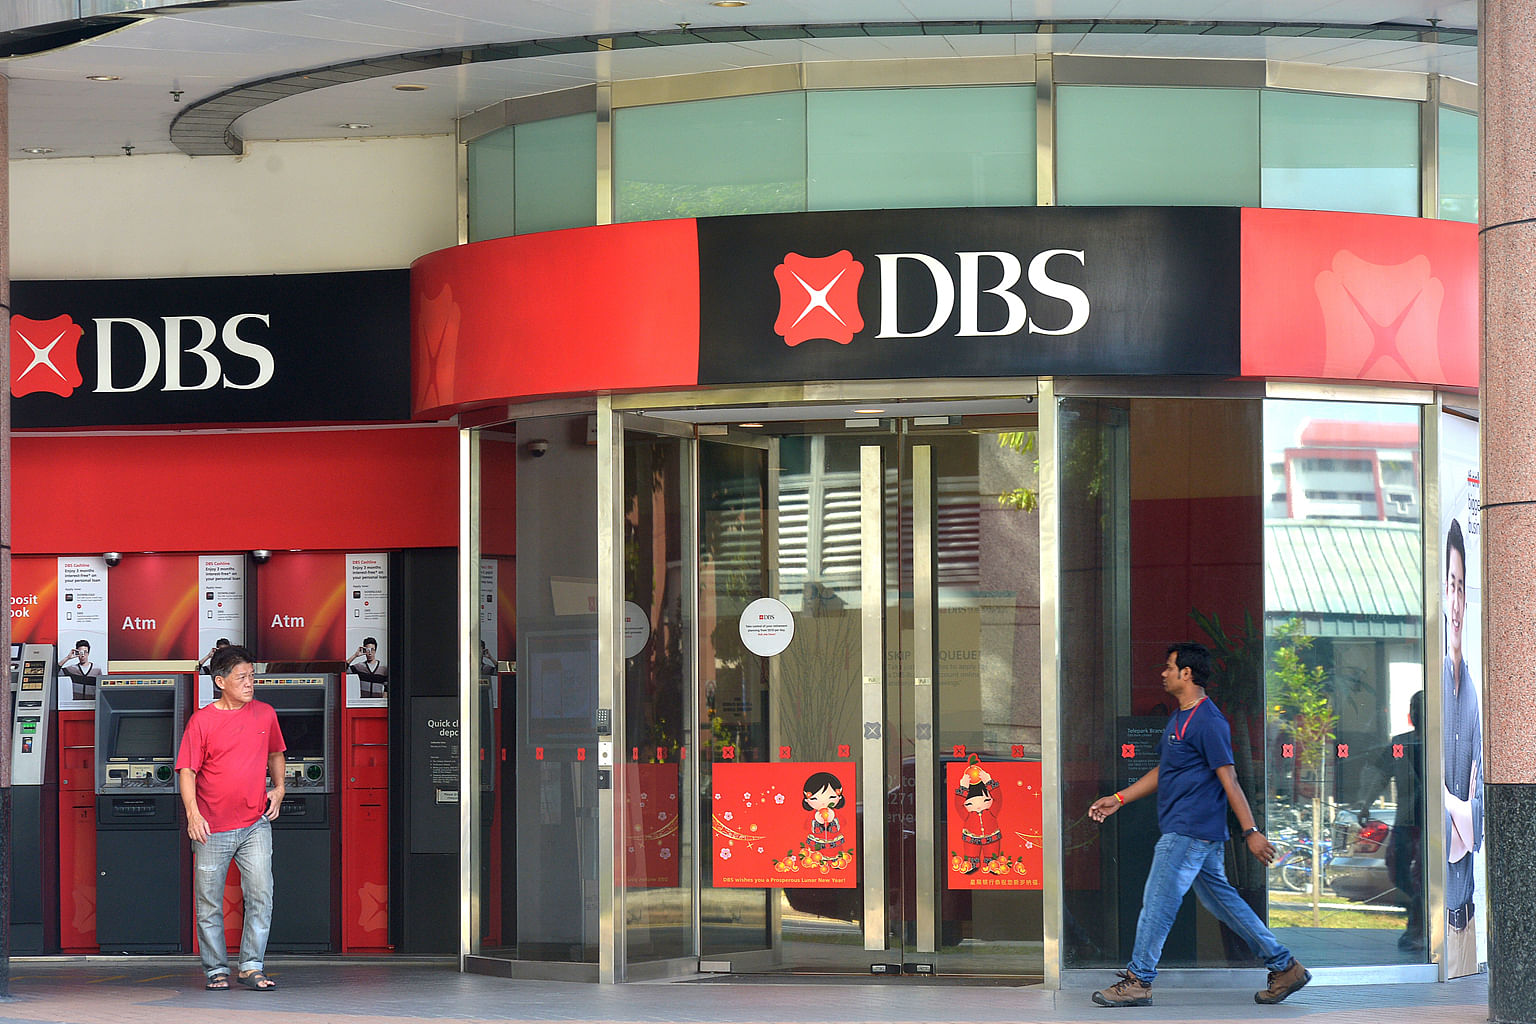 Fund managers are falling in love with local bank shares again, fuelling a run-up in DBS, OCBC and UOB. Topping the buy list was DBS, which attracted a net $619.4 million in purchases last month.